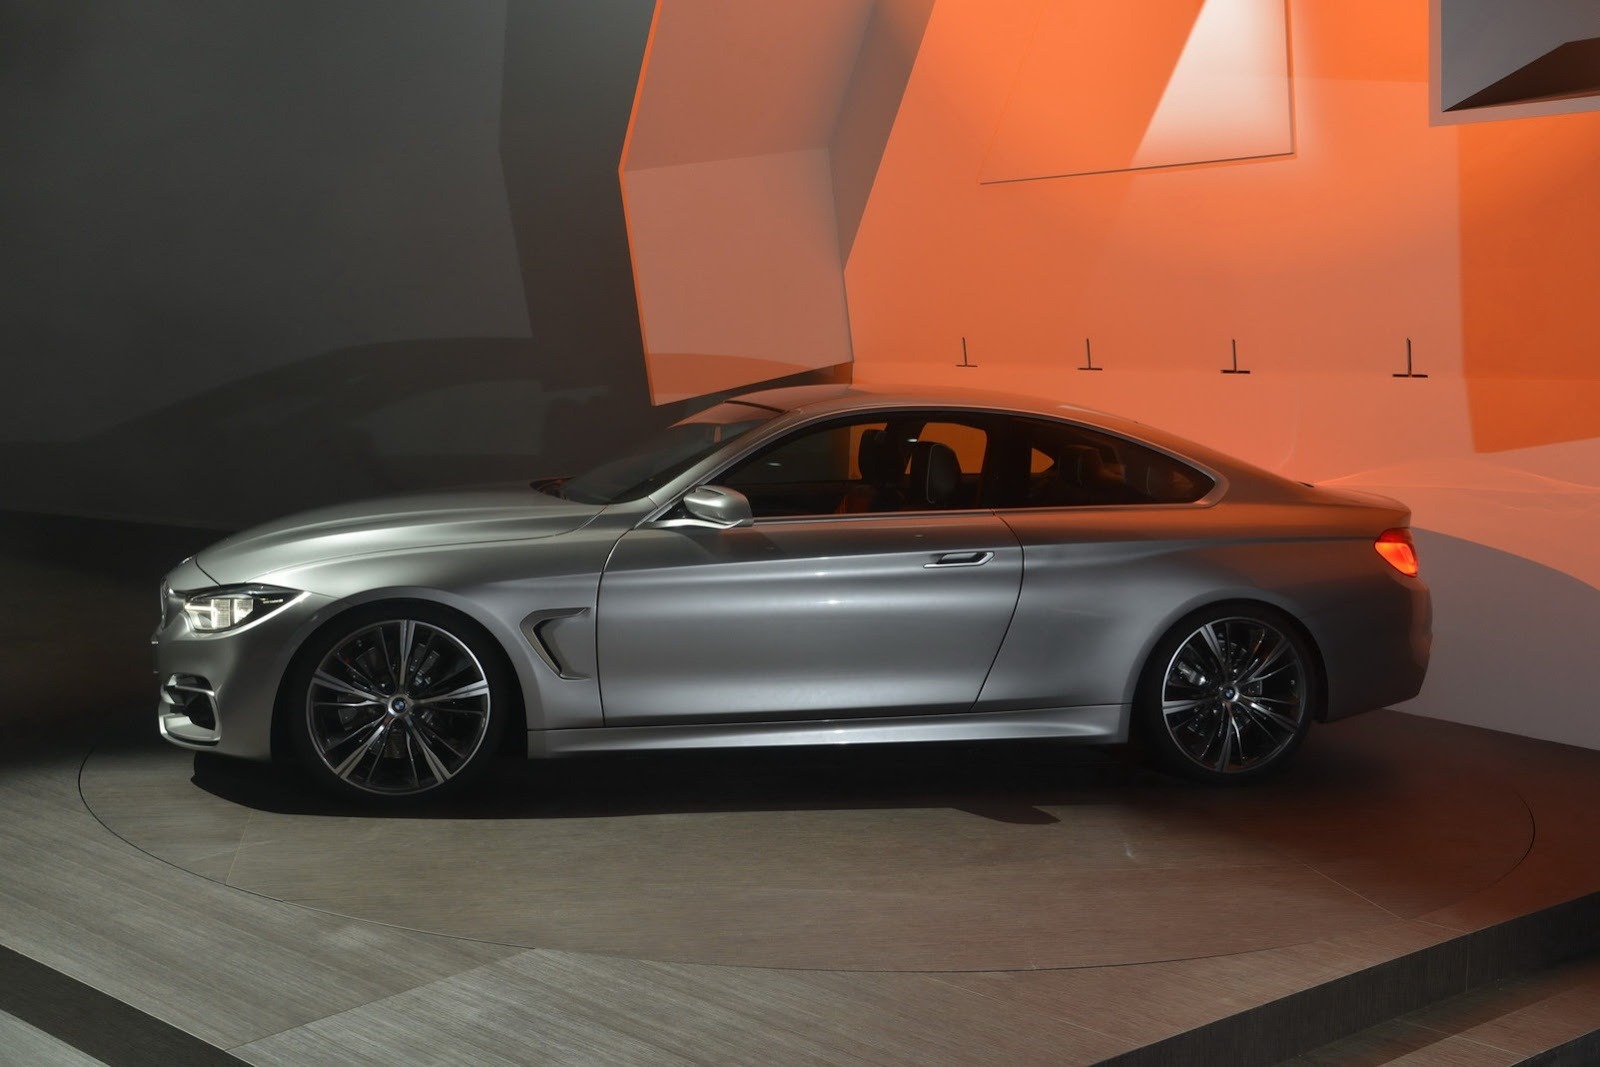 BMW 4-Series Document Allegedly Confirms Production Dates and Engine